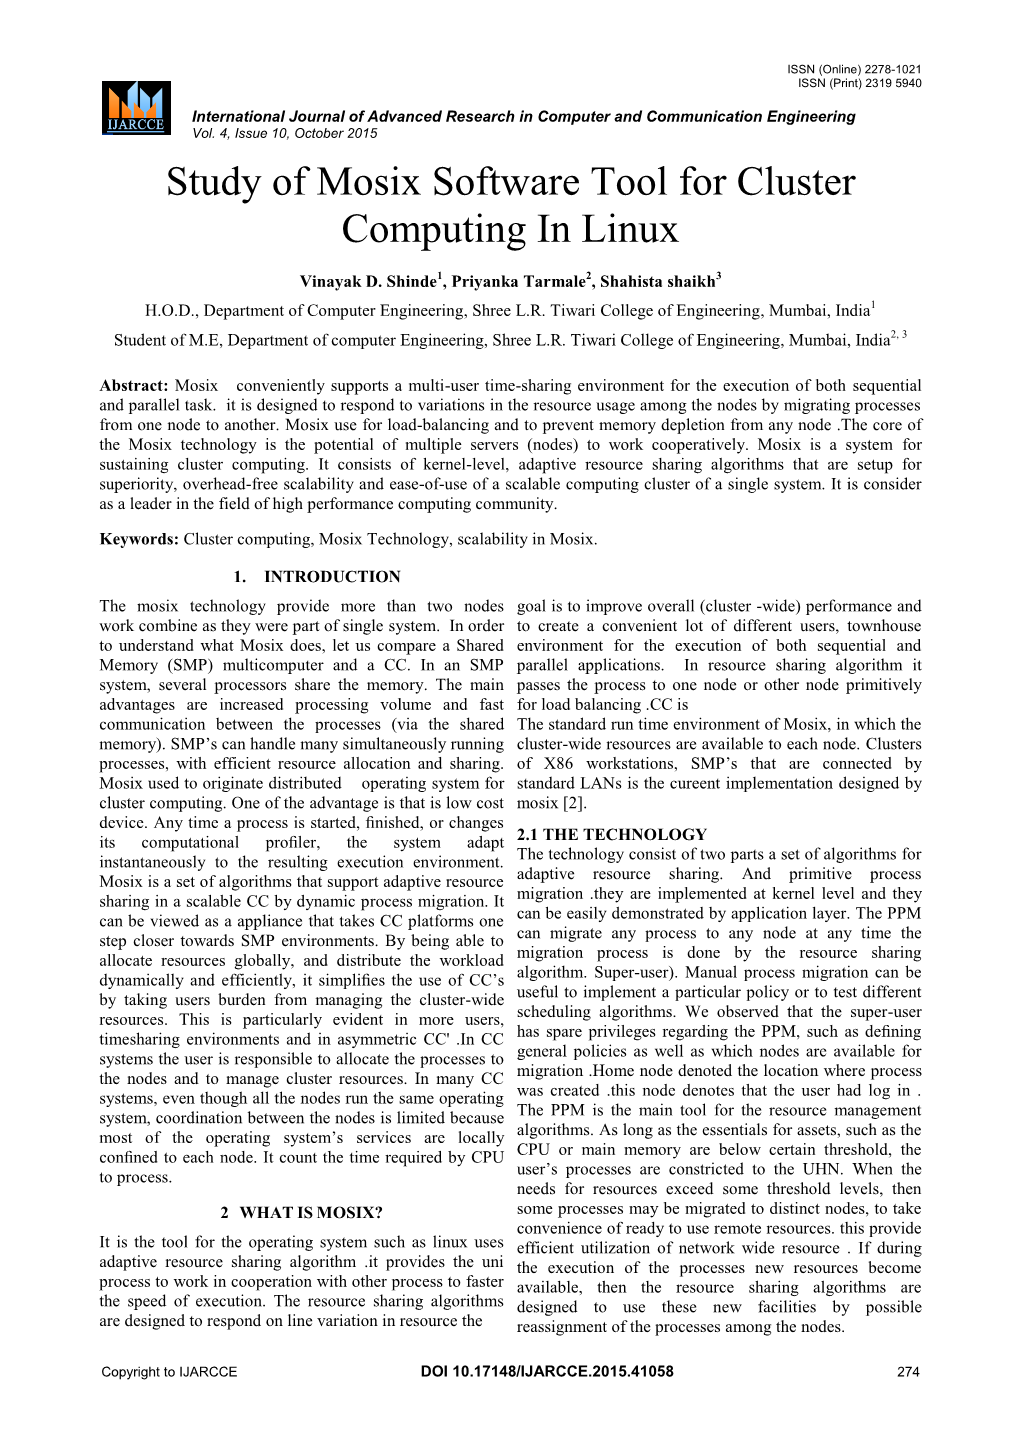 Study of Mosix Software Tool for Cluster Computing in Linux